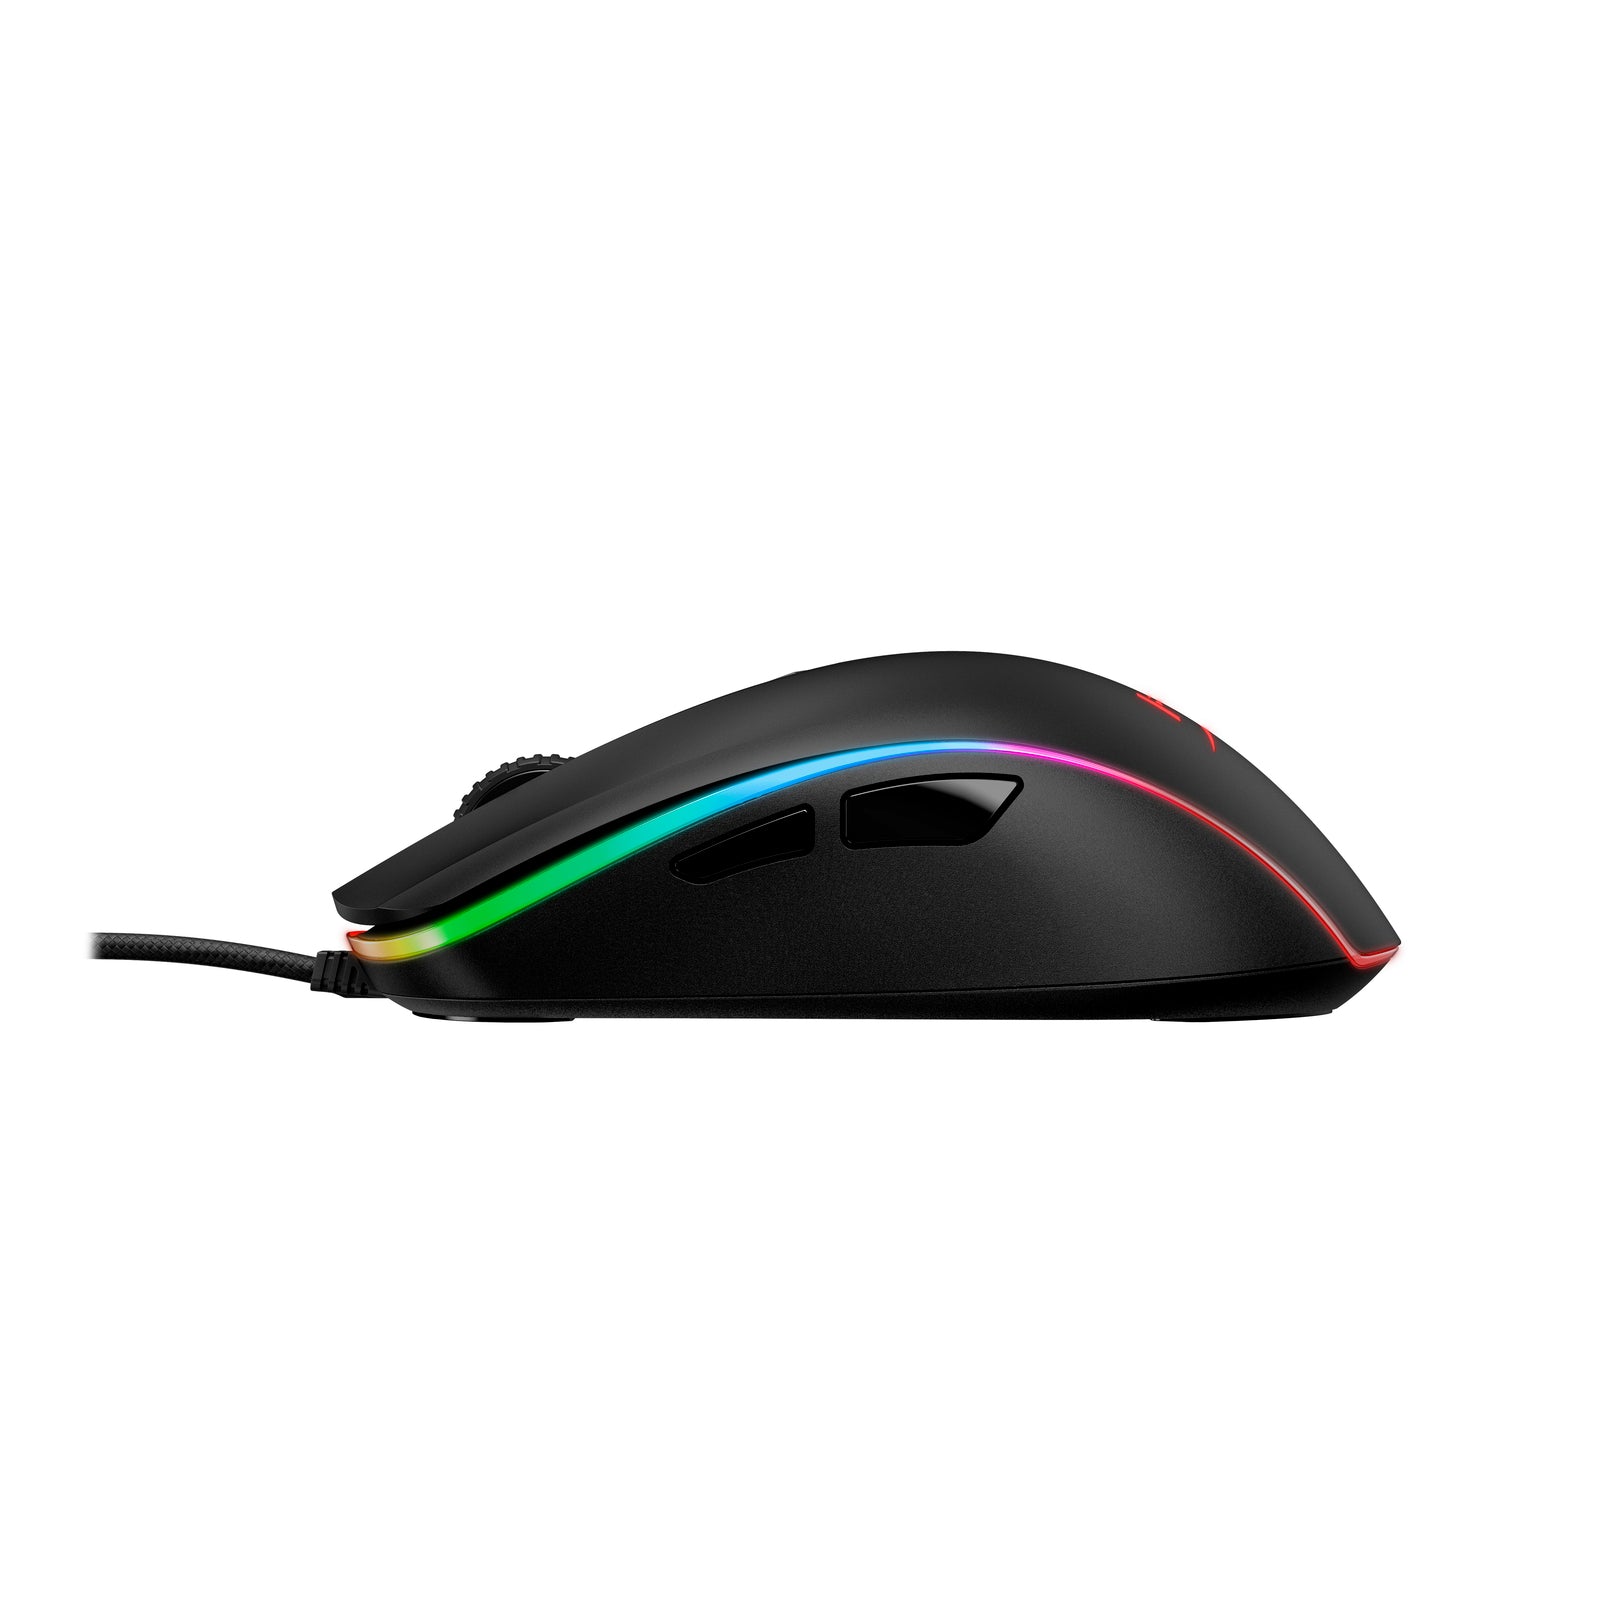 Pulsefire Surge – | Mouse HyperX RGB Gaming